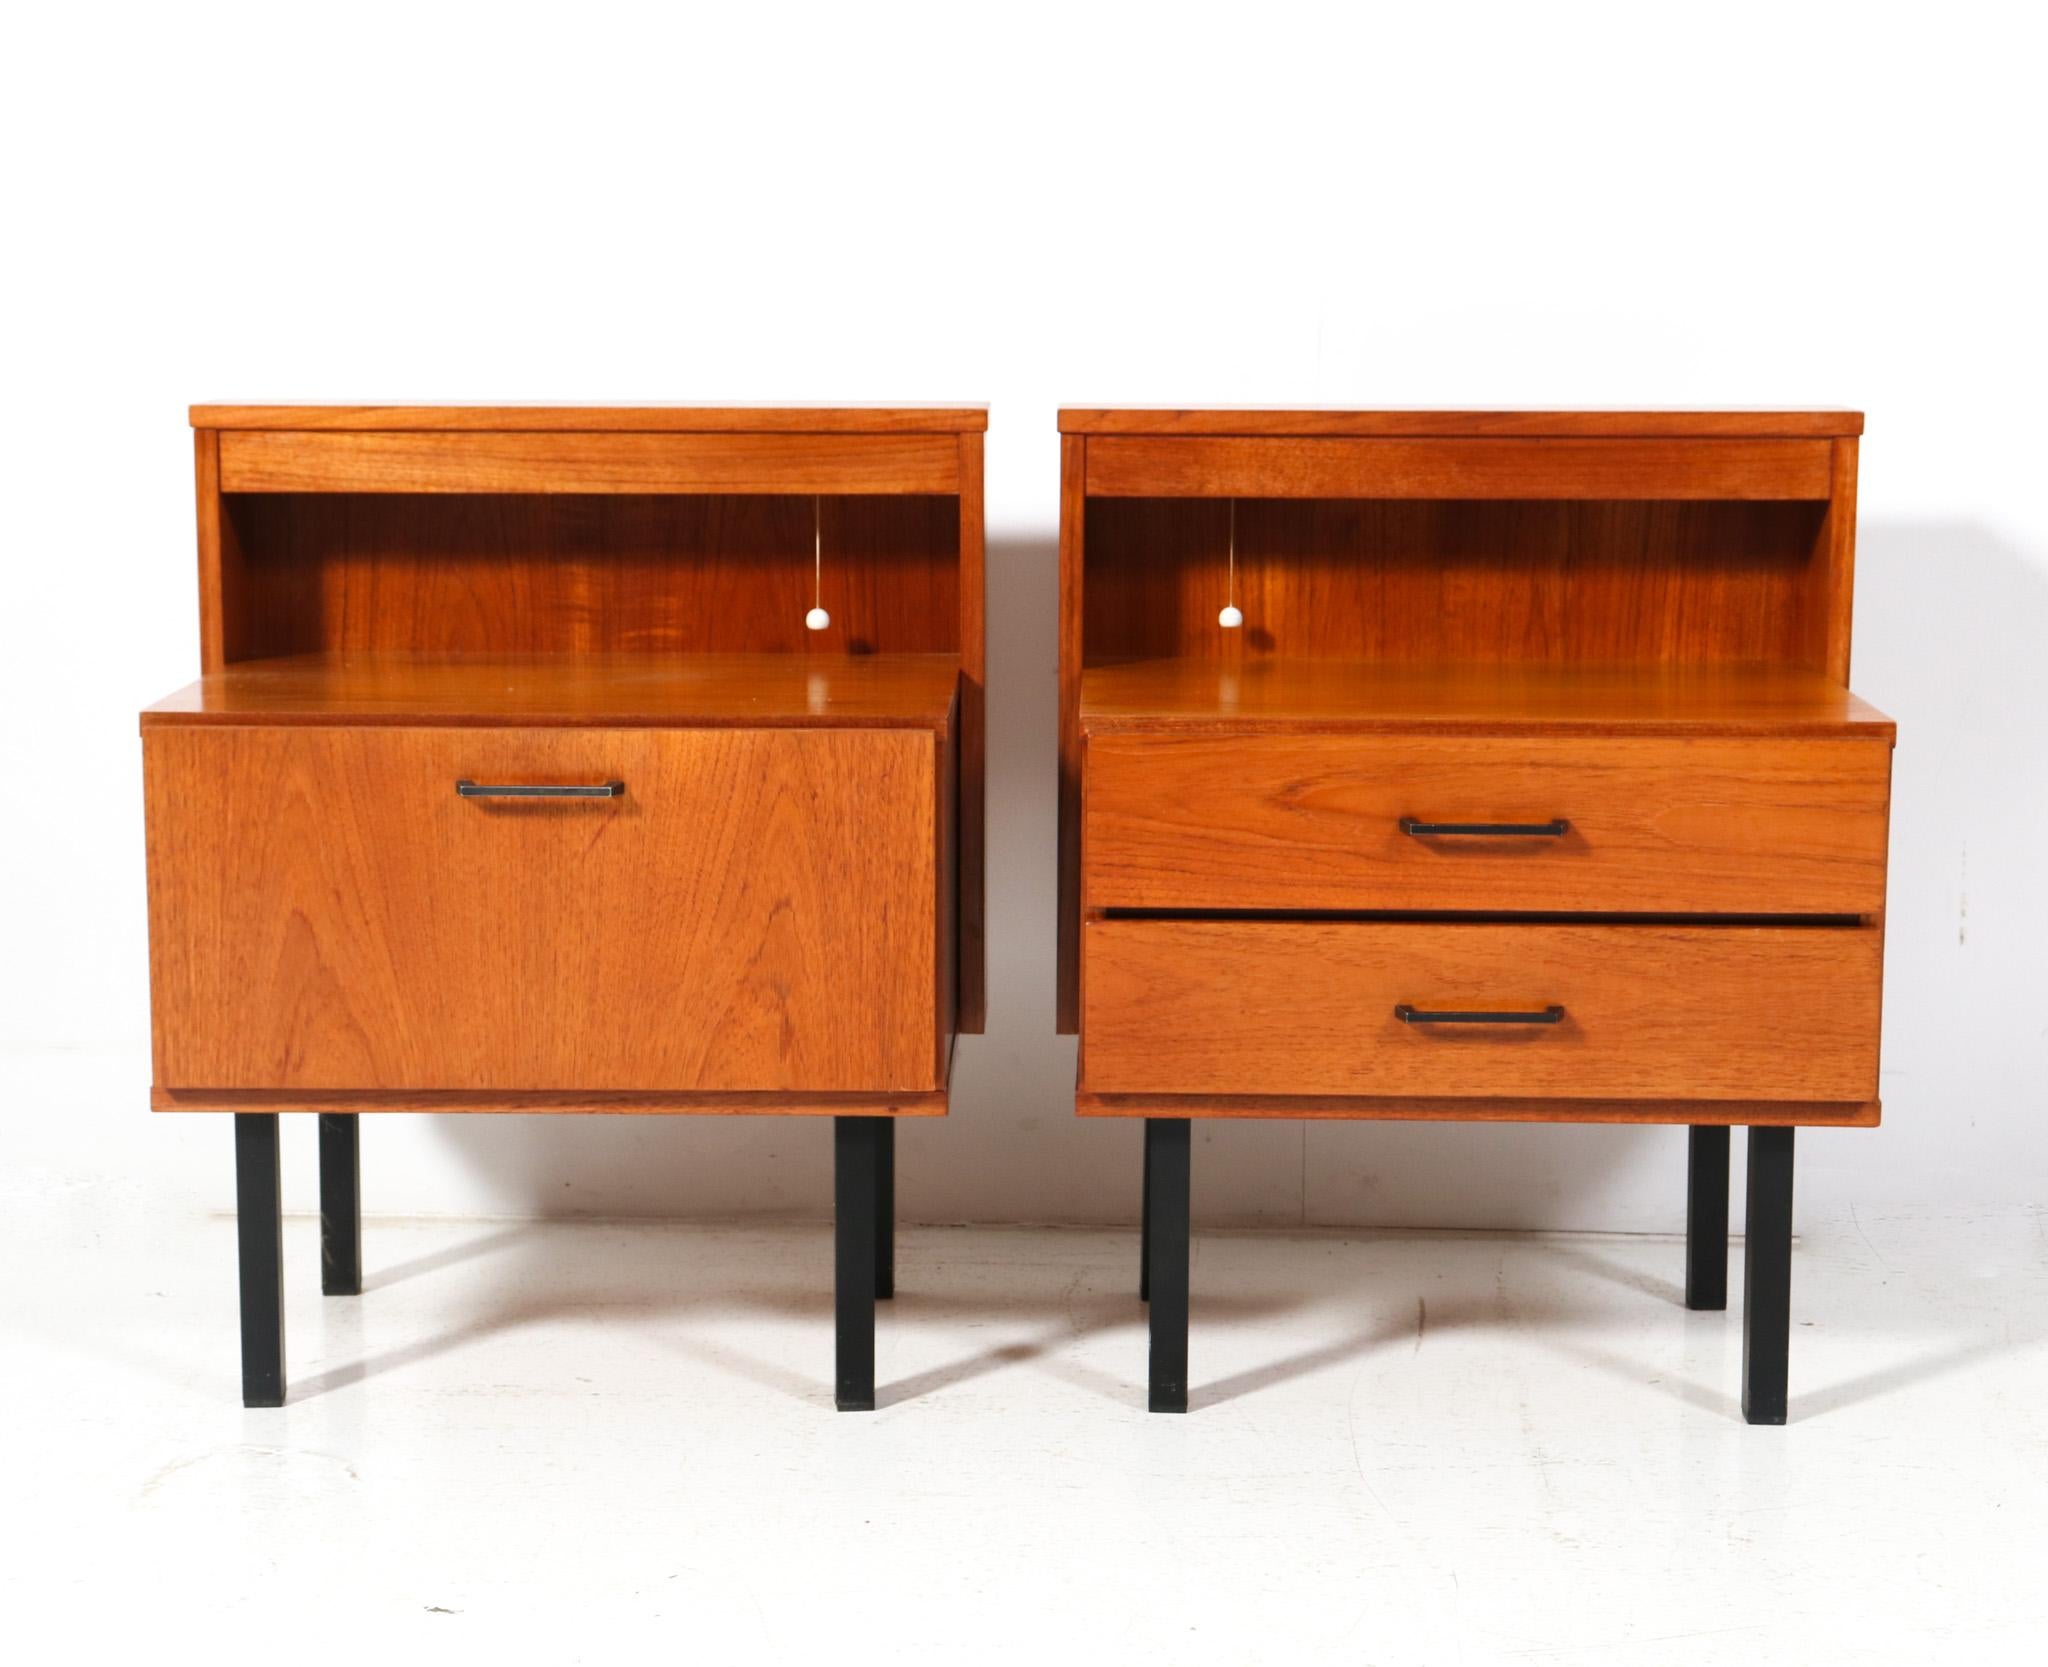 Stunning and rare pair of Mid-Century Modern nightstands or bedside tables.
Striking Dutch design from the 1960s.
Original veneered teak frames on original black lacquered feet.
Rare because of the fact, that they have integrated lightning.
This